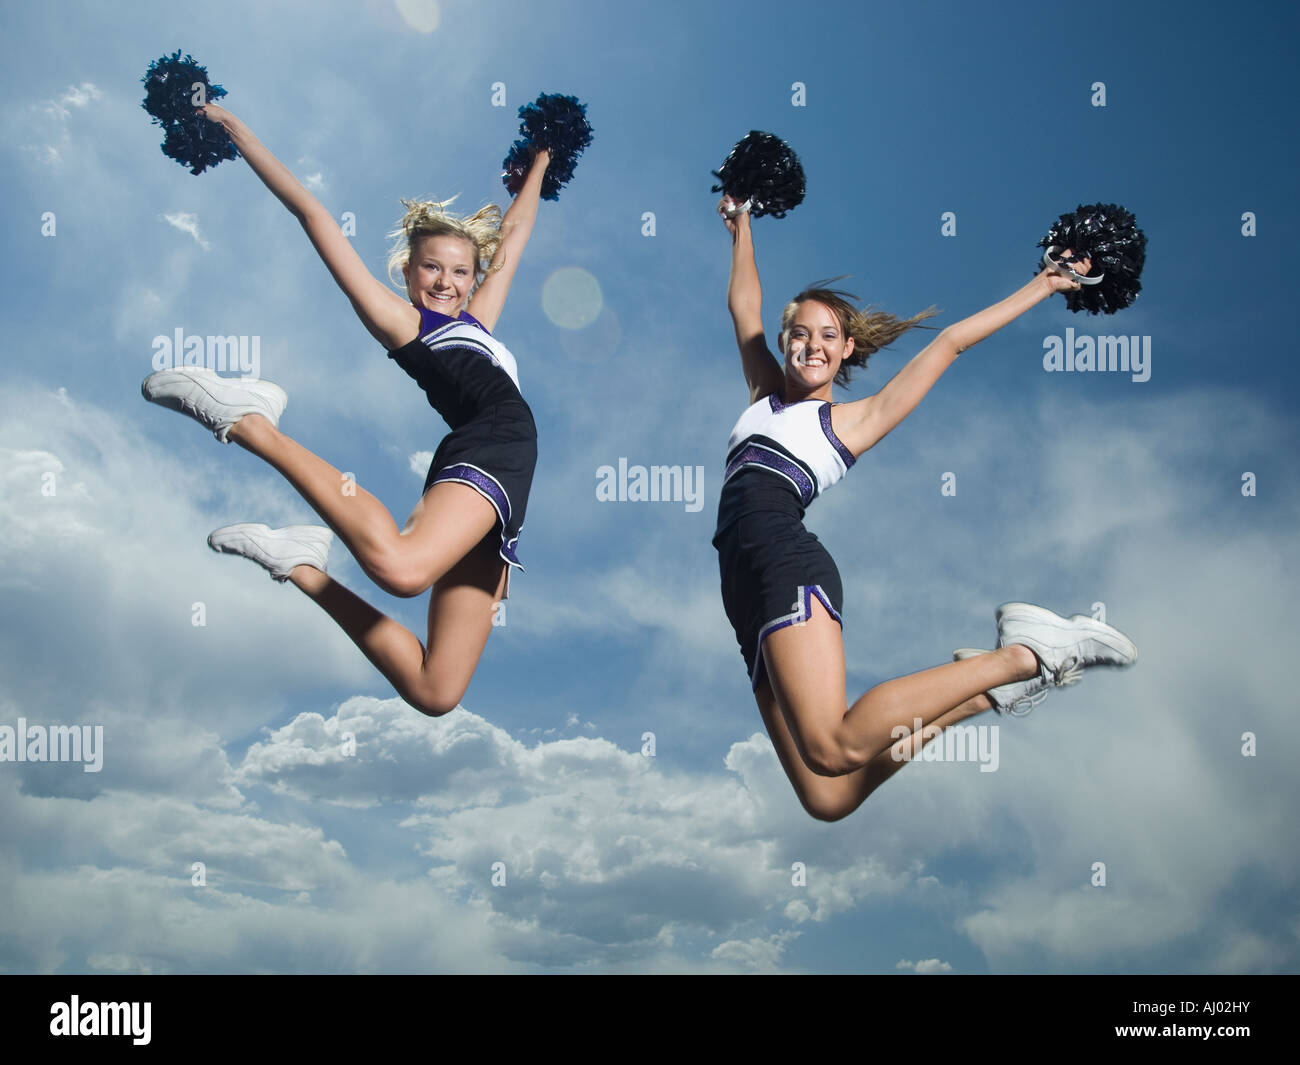 Cheerleaders with pom poms jumping Stock Photo